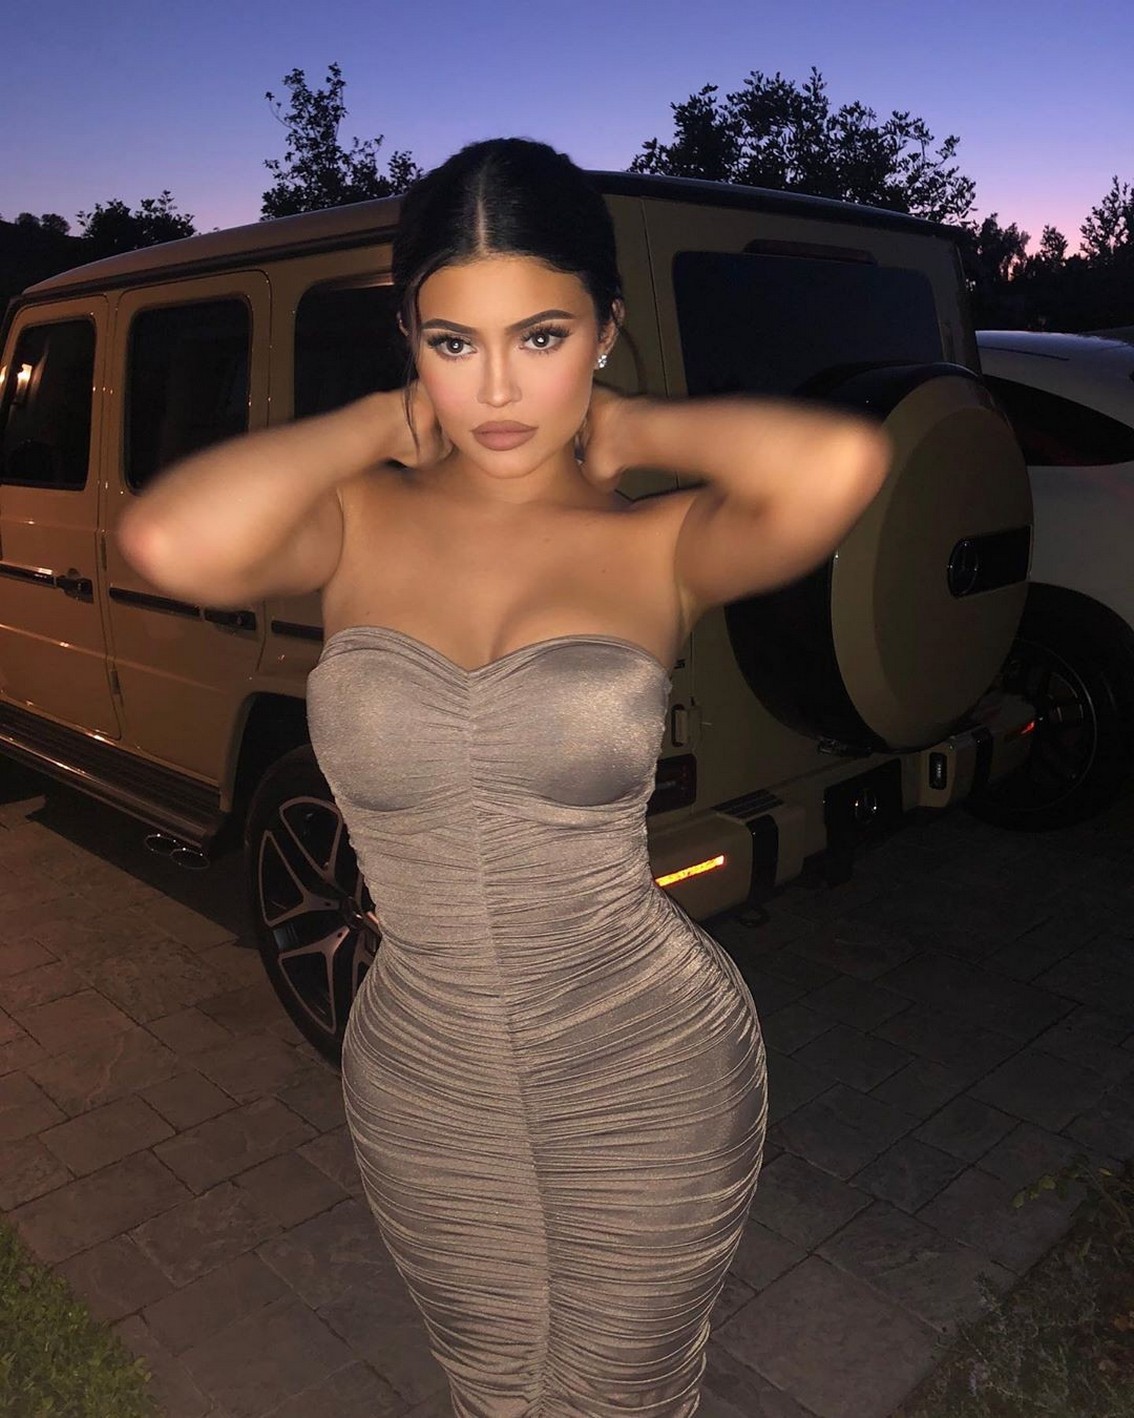 Kylie Jenner Big Tits Small Top TheFappeningPro 3 - Kylie Jenner Showed Off Big Tits In A White Top (5 Photos)